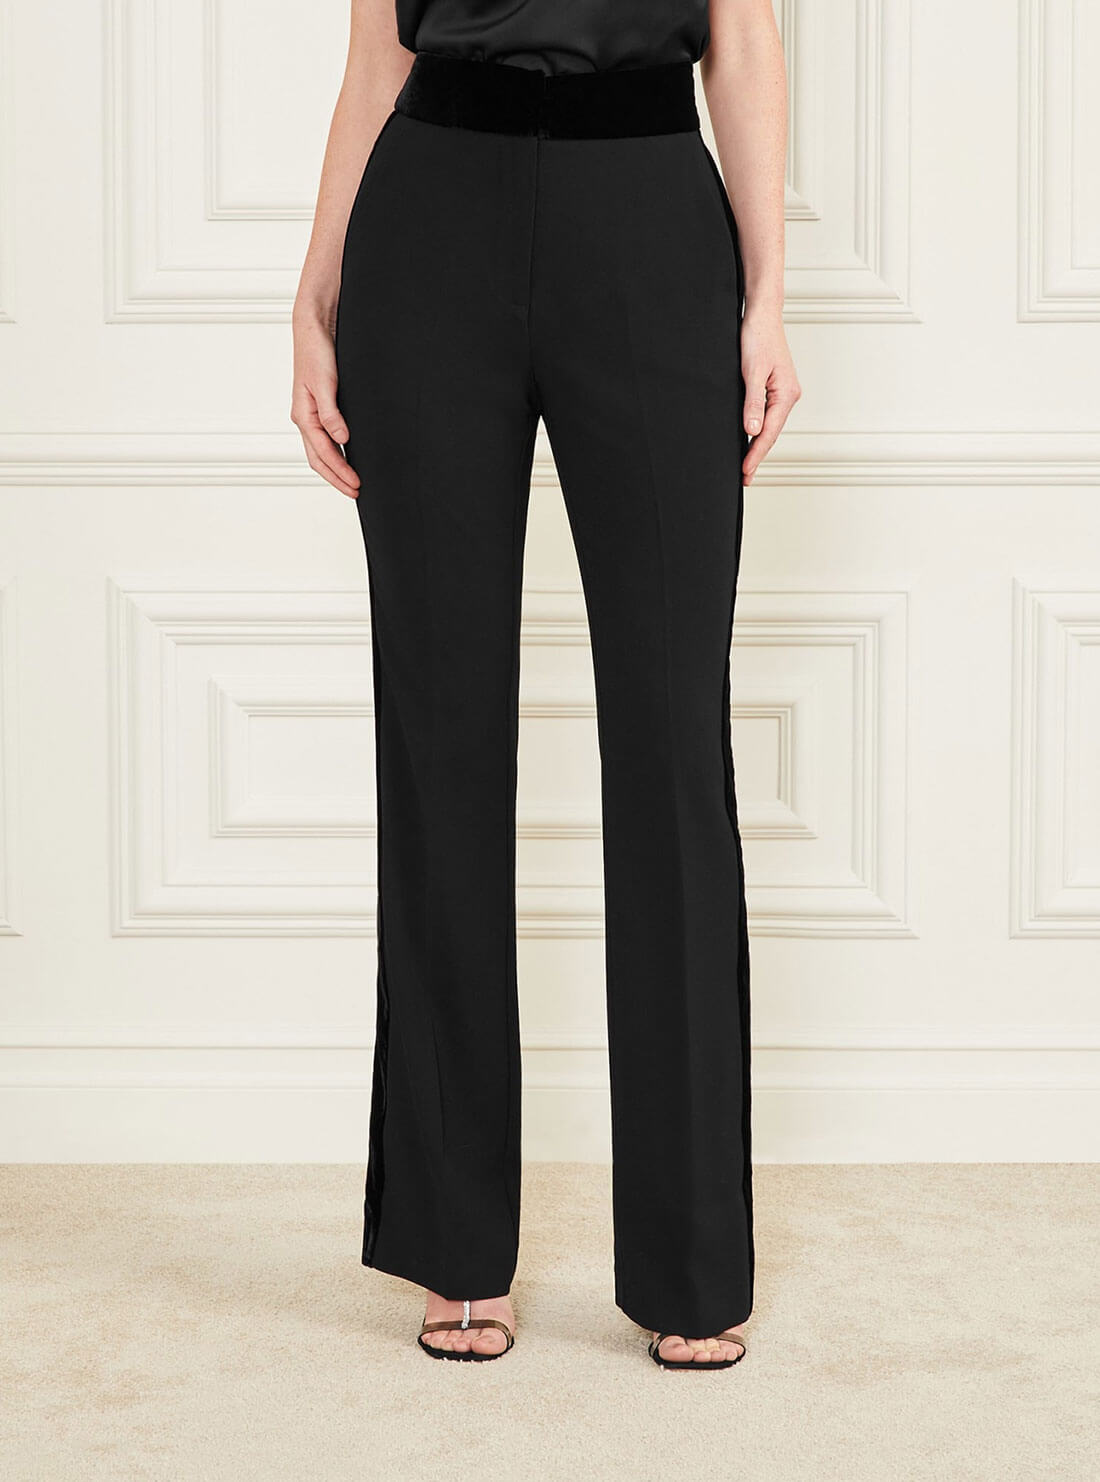 Black Marciano Velvet Becka High-Rise Pants | GUESS Women's | Front view